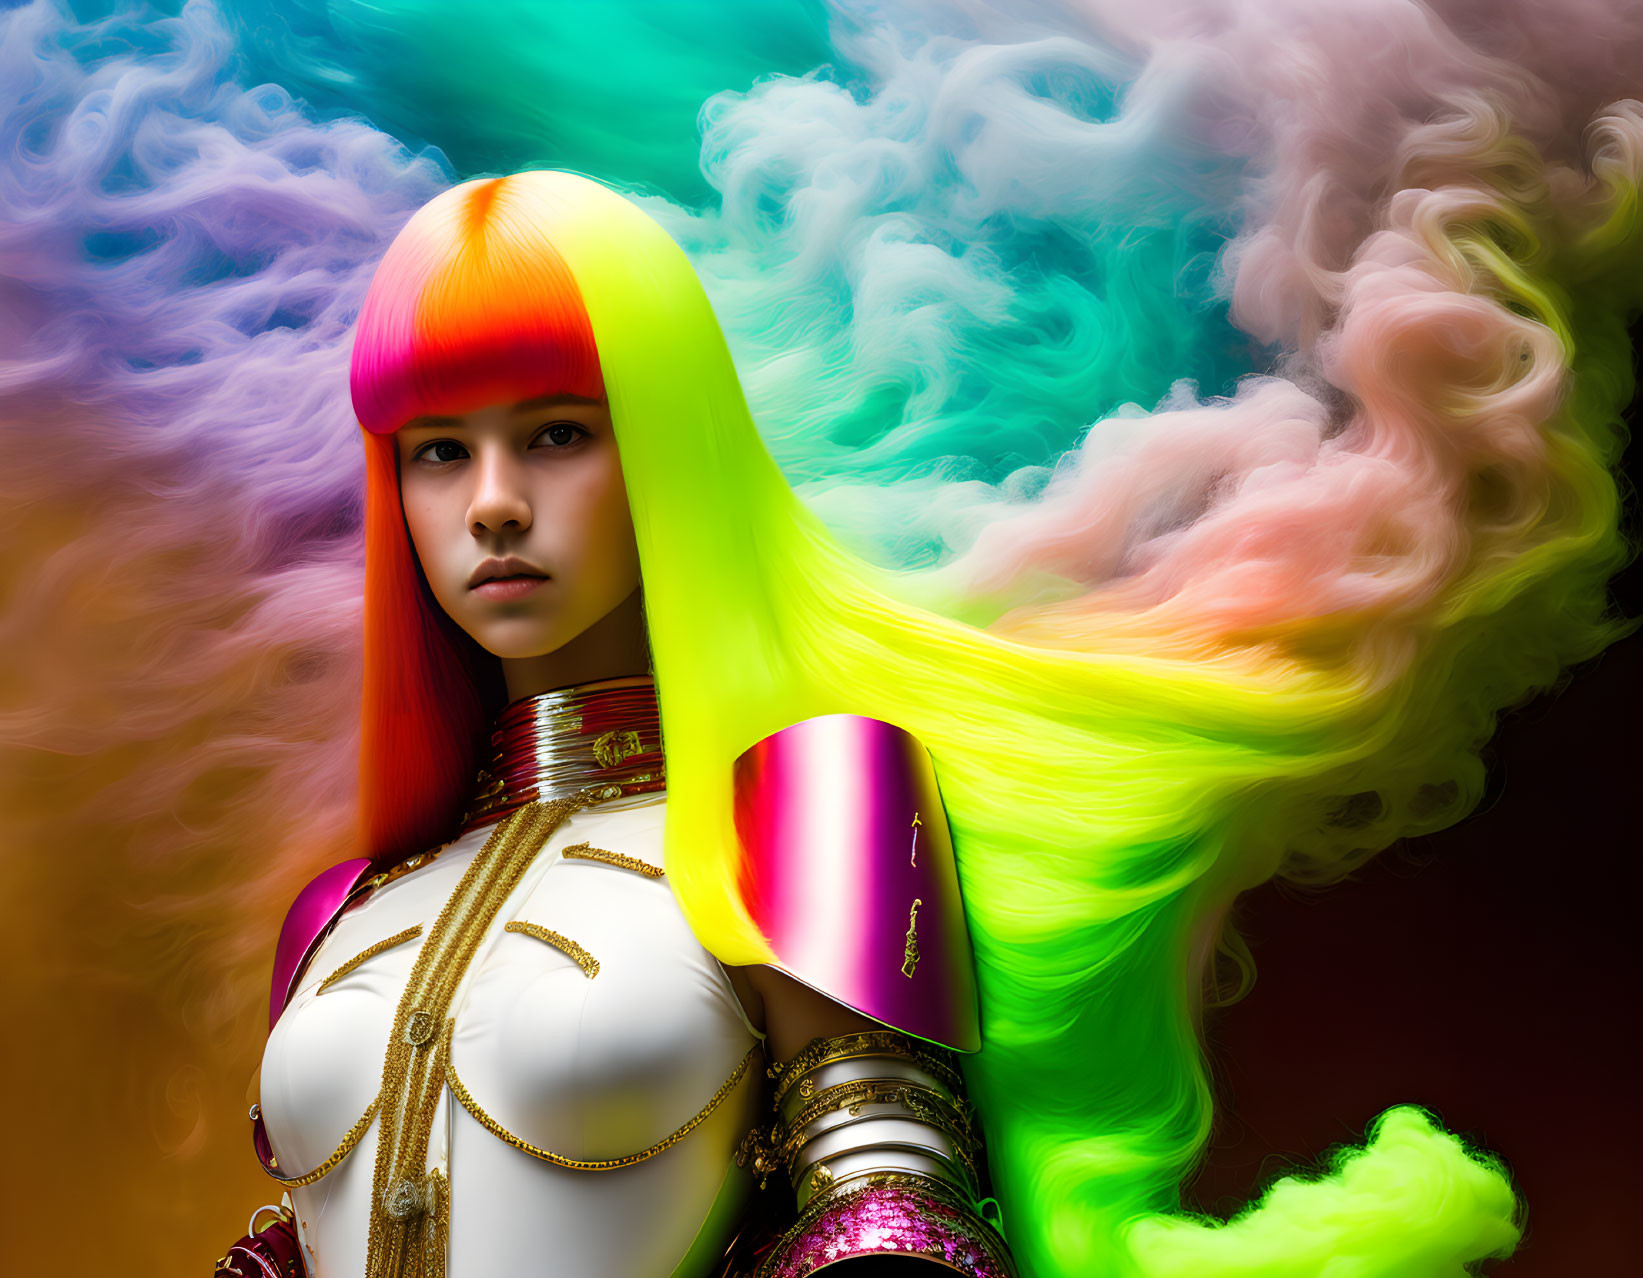 Multicolored hair and futuristic armor against swirling colorful backdrop